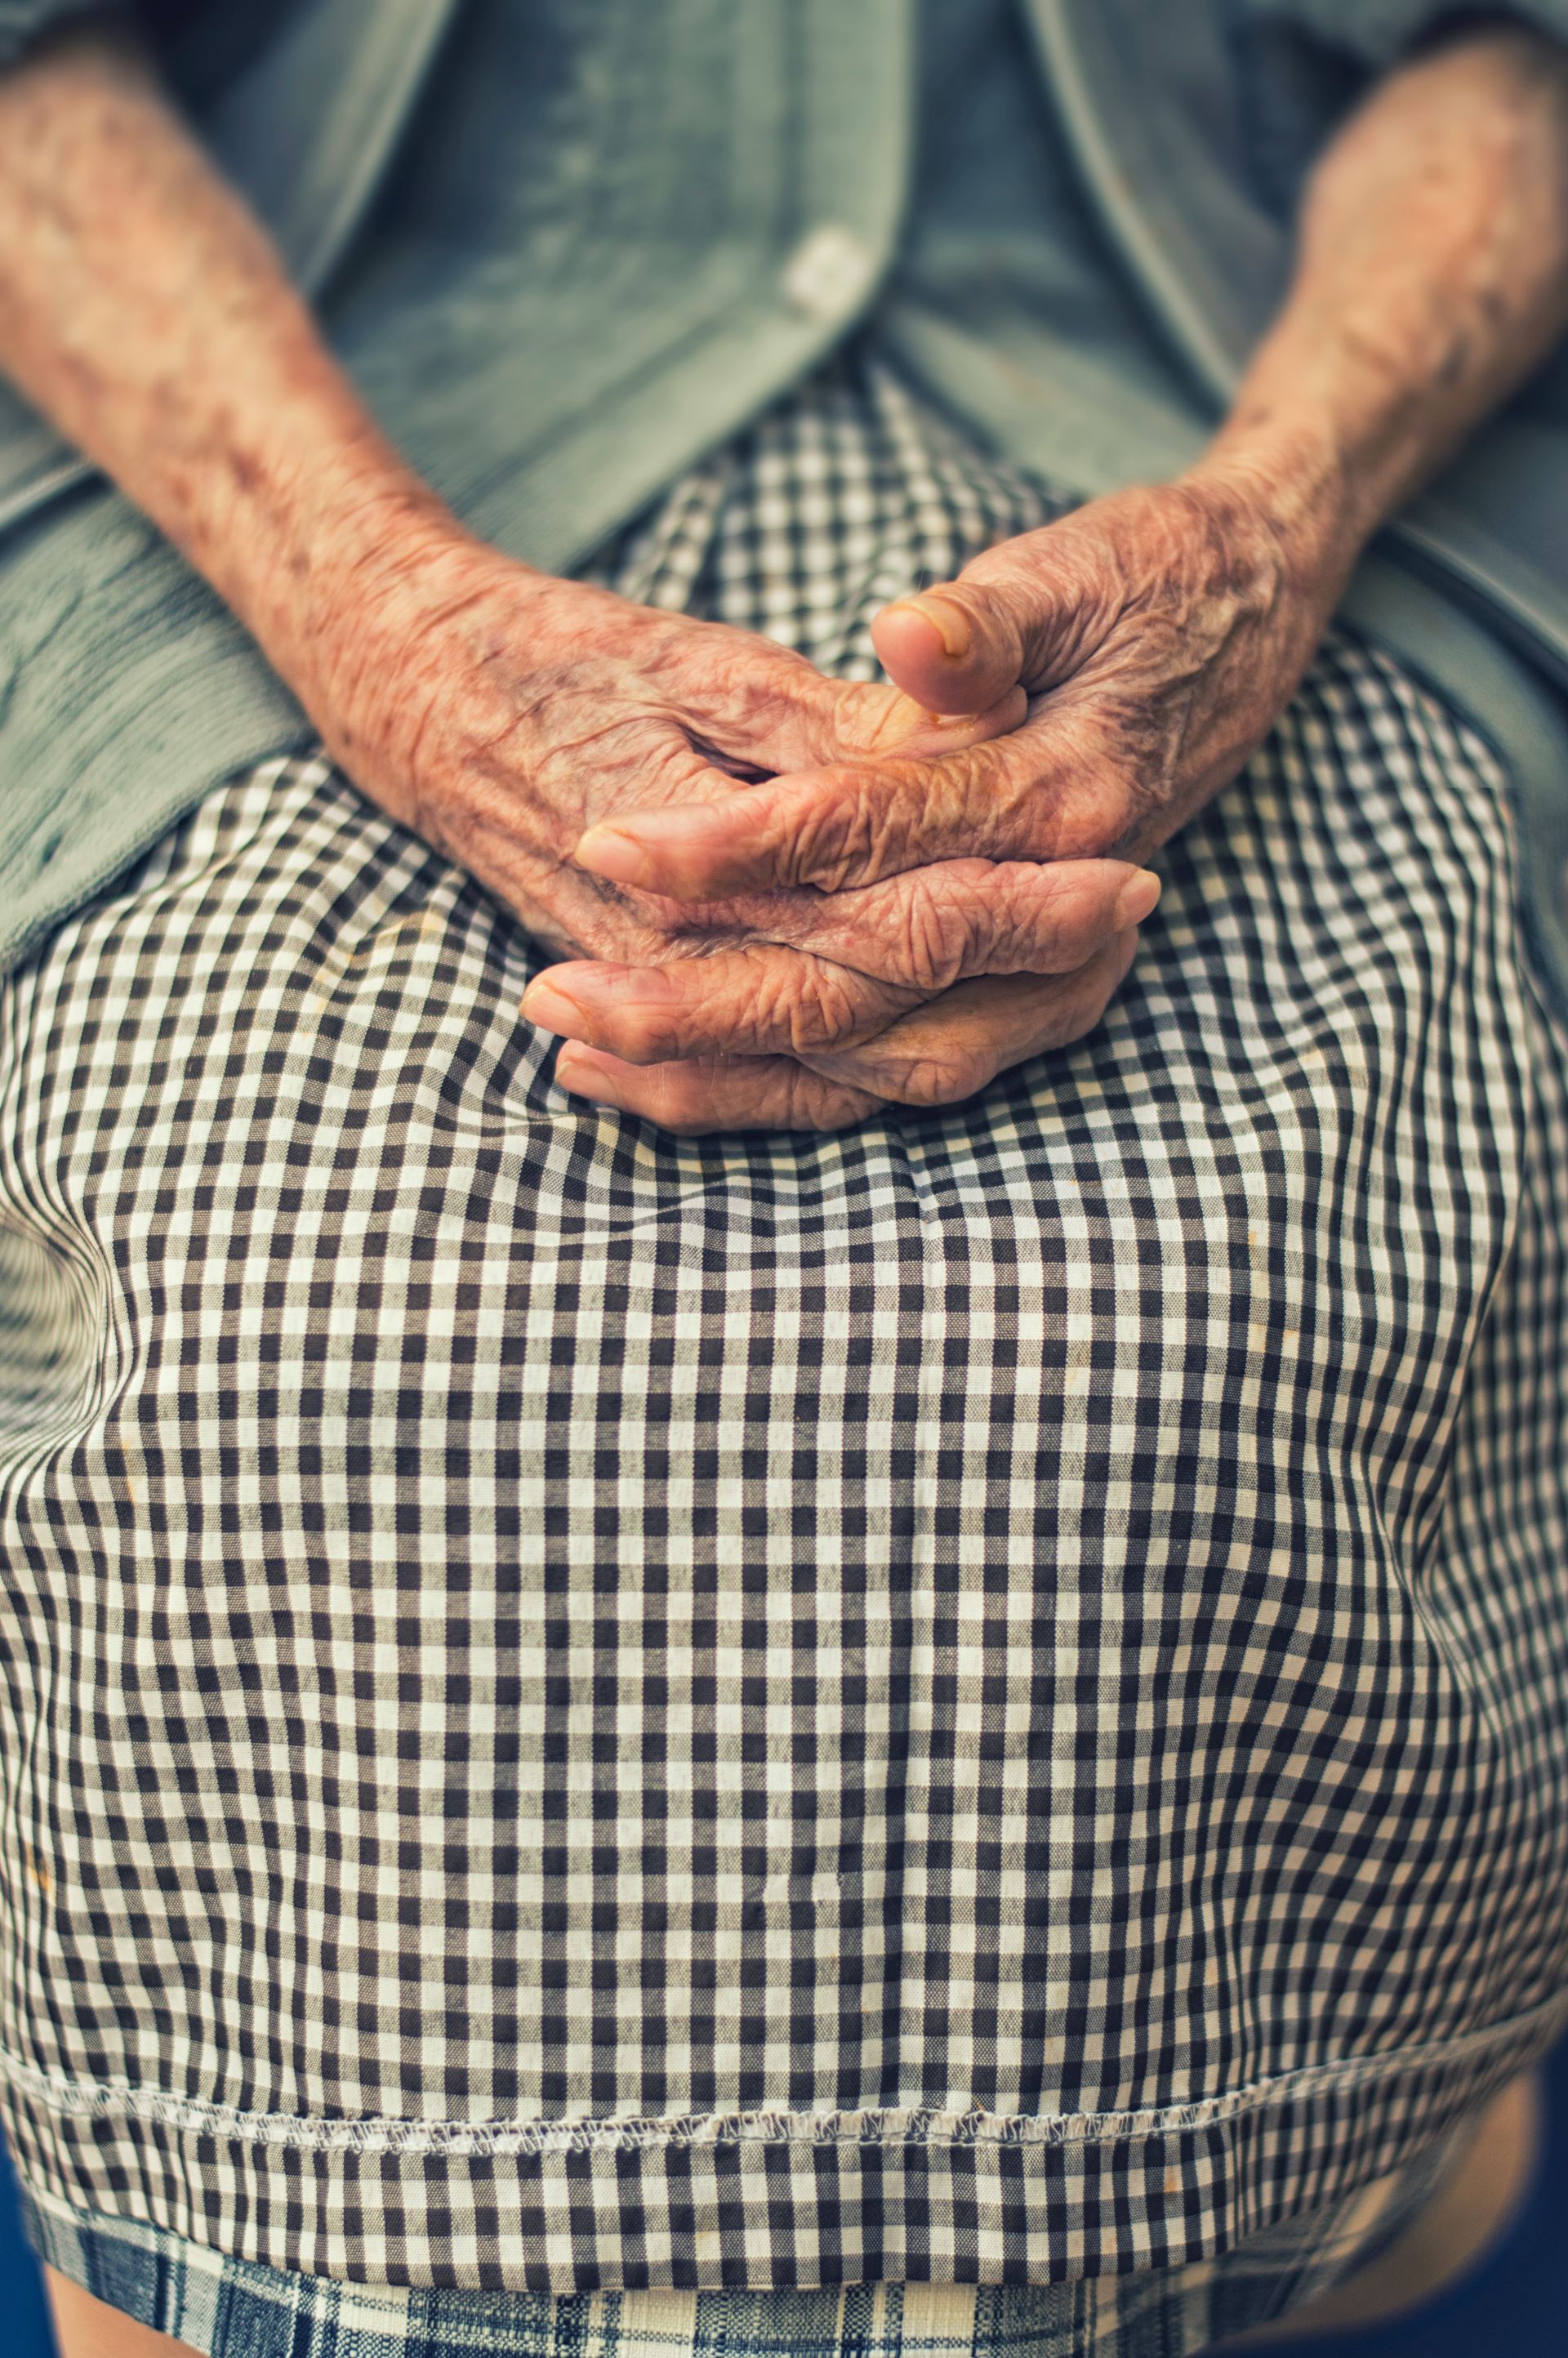 an elderly lady's hands sitting in her lap